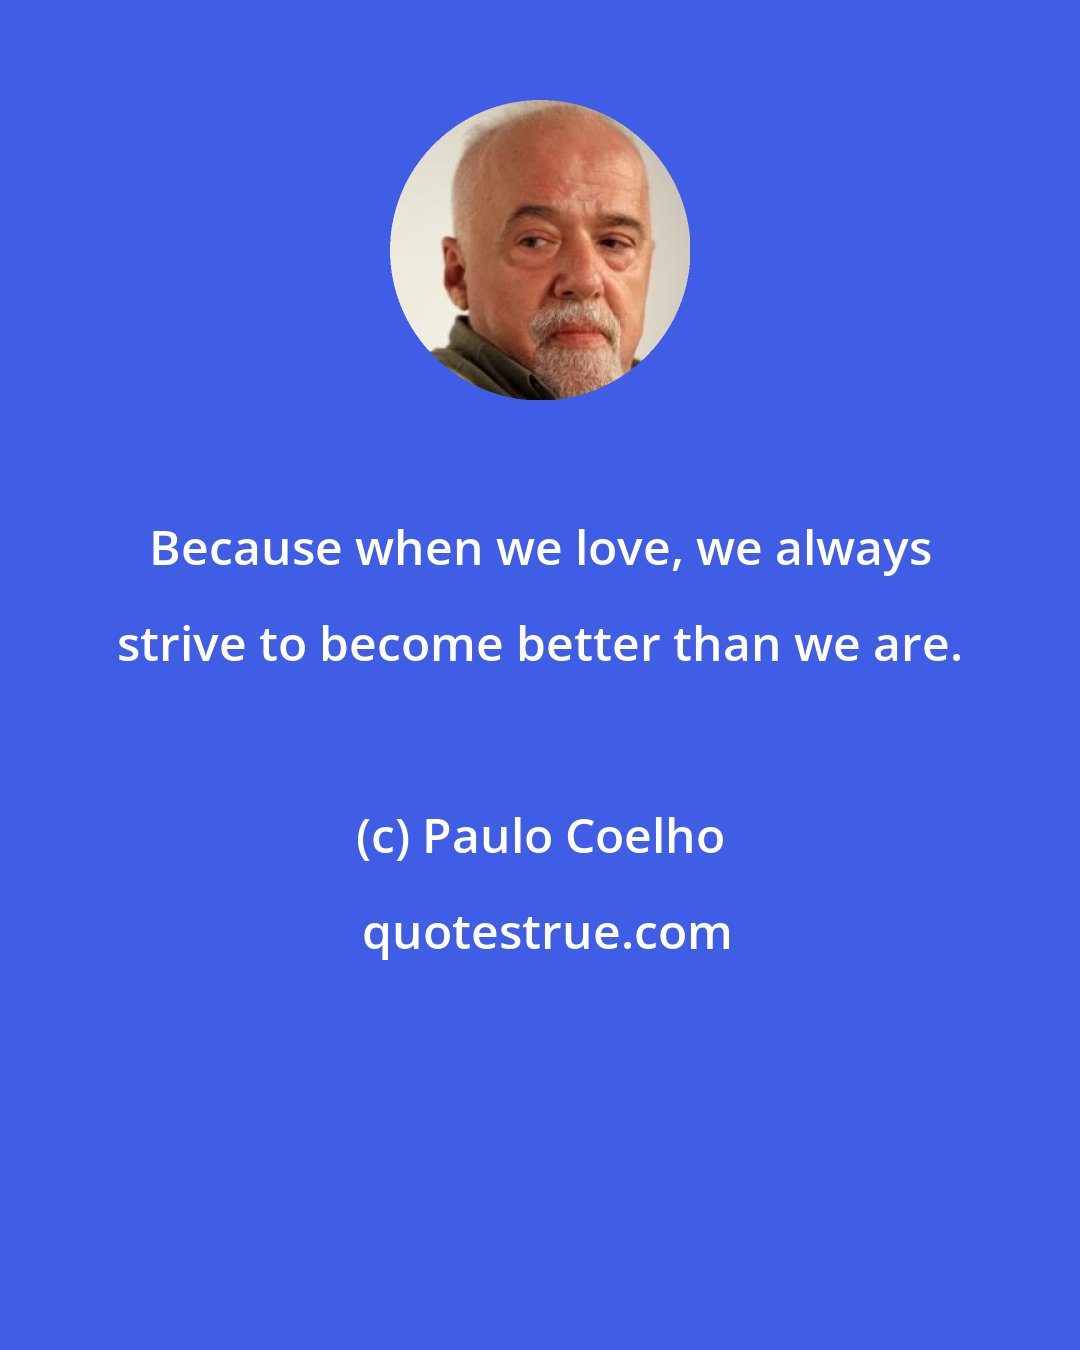 Paulo Coelho: Because when we love, we always strive to become better than we are.